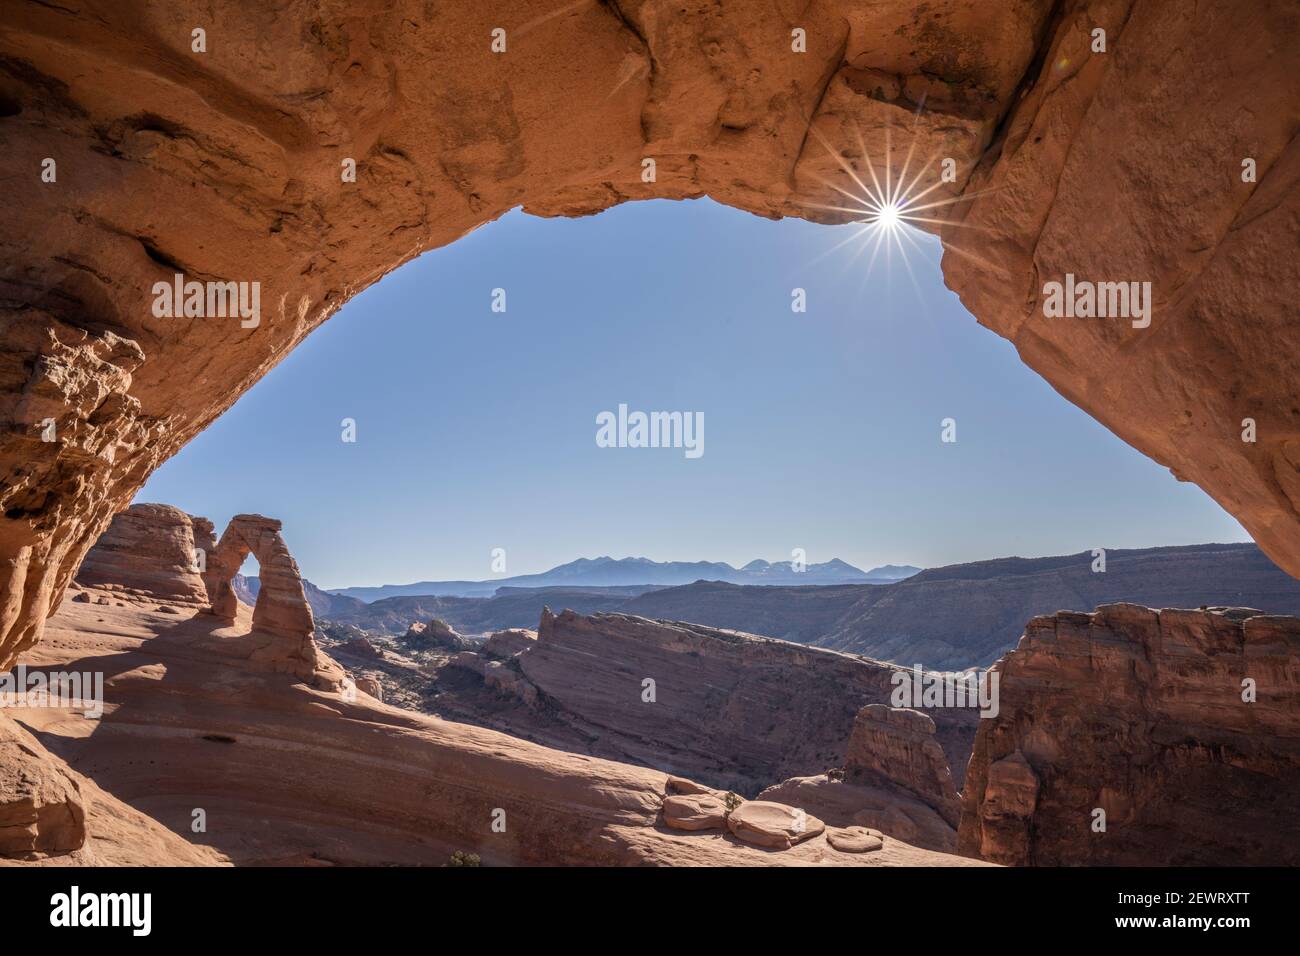 View of Delicate Arch through Frame Arch with sunburst, Arches National Park, Utah, United States of America, North America Stock Photo